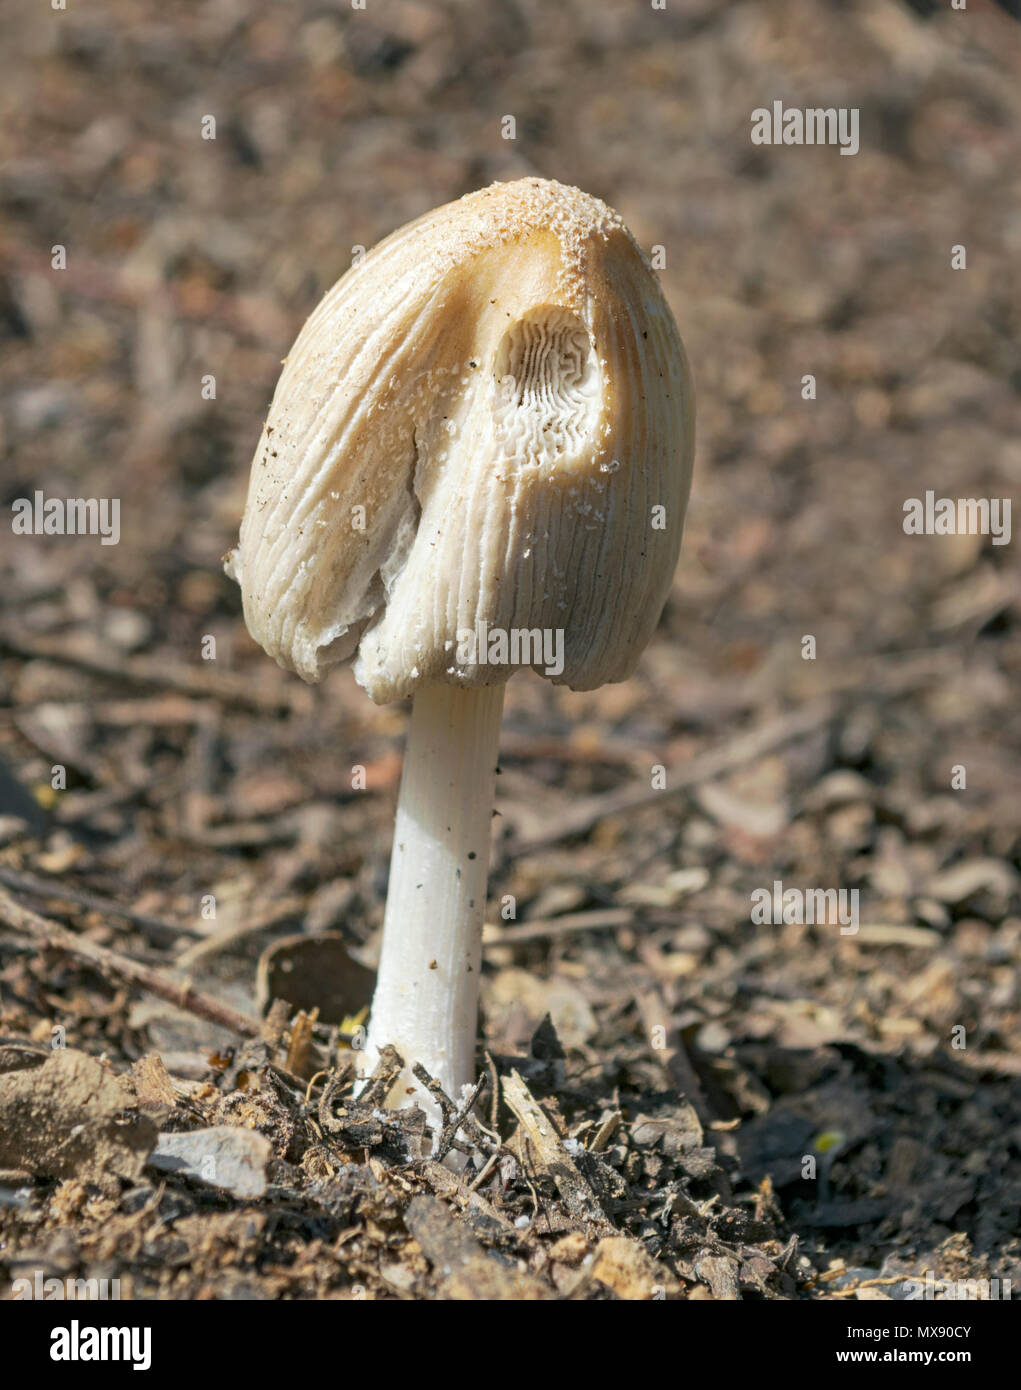 cream-colored conical mushroom growing in compost in a garden in the desert Stock Photo